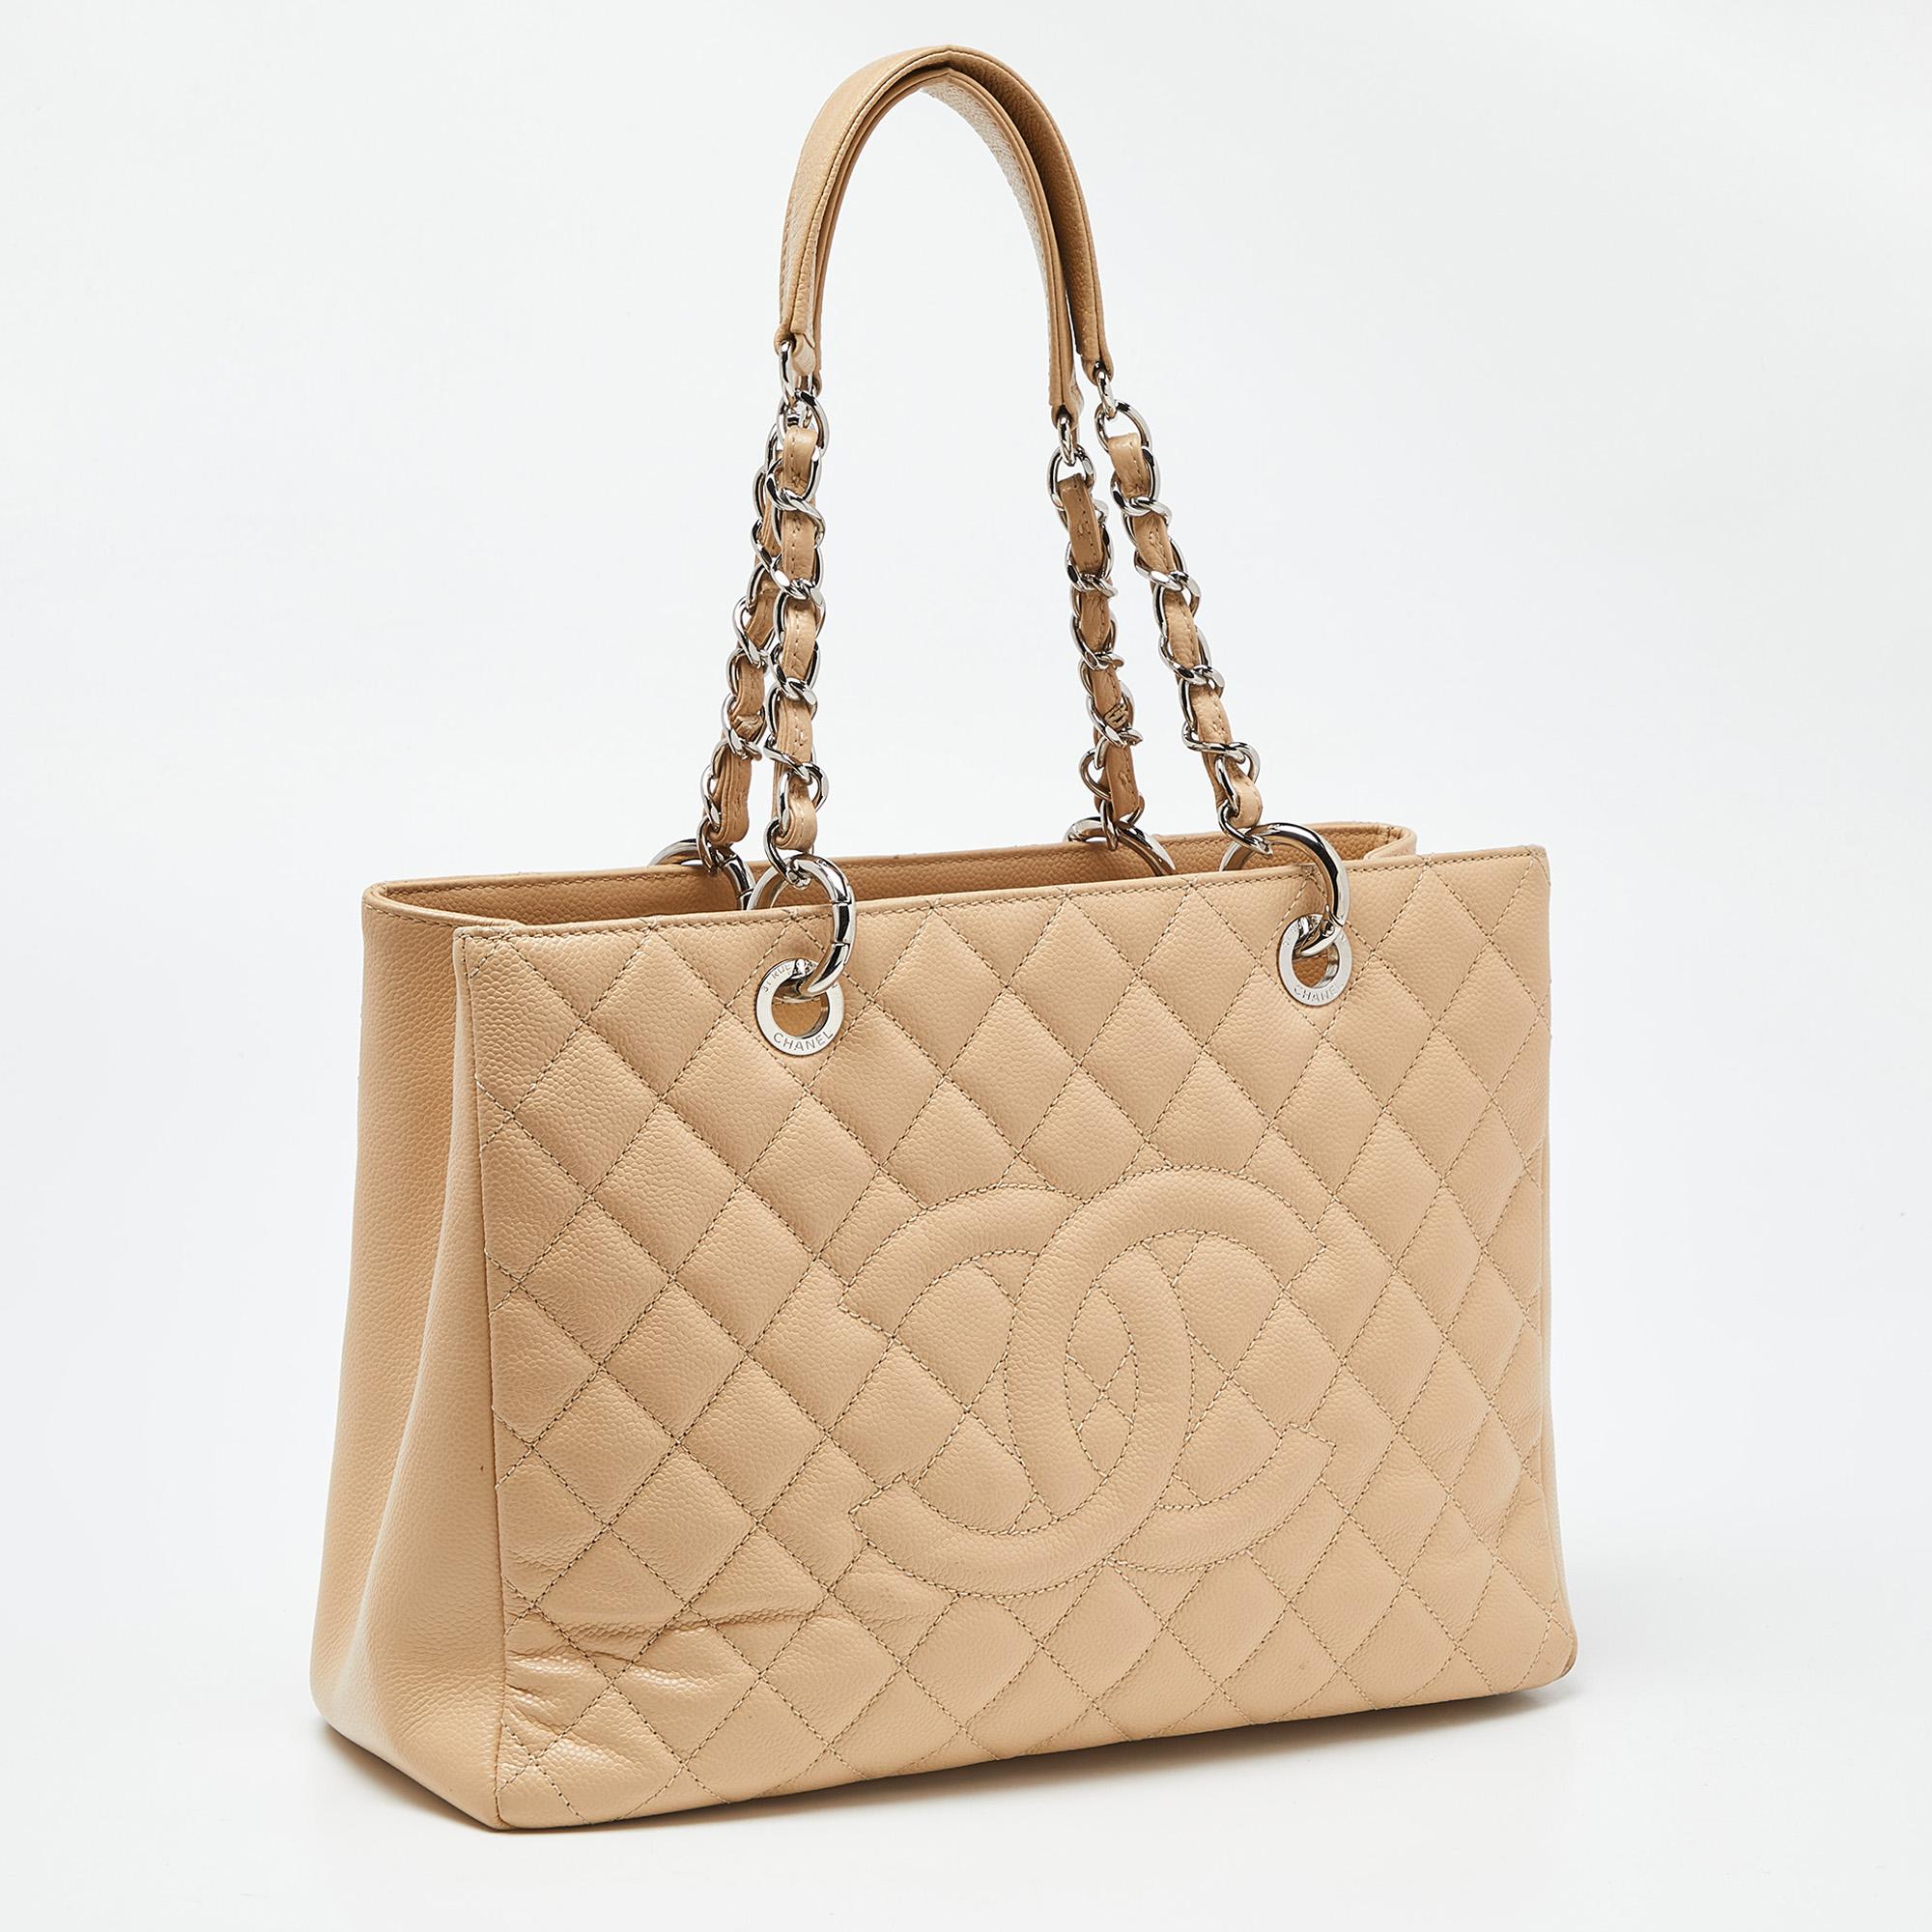 Chanel Beige Quilted Caviar Leather GST Shopper Tote 5